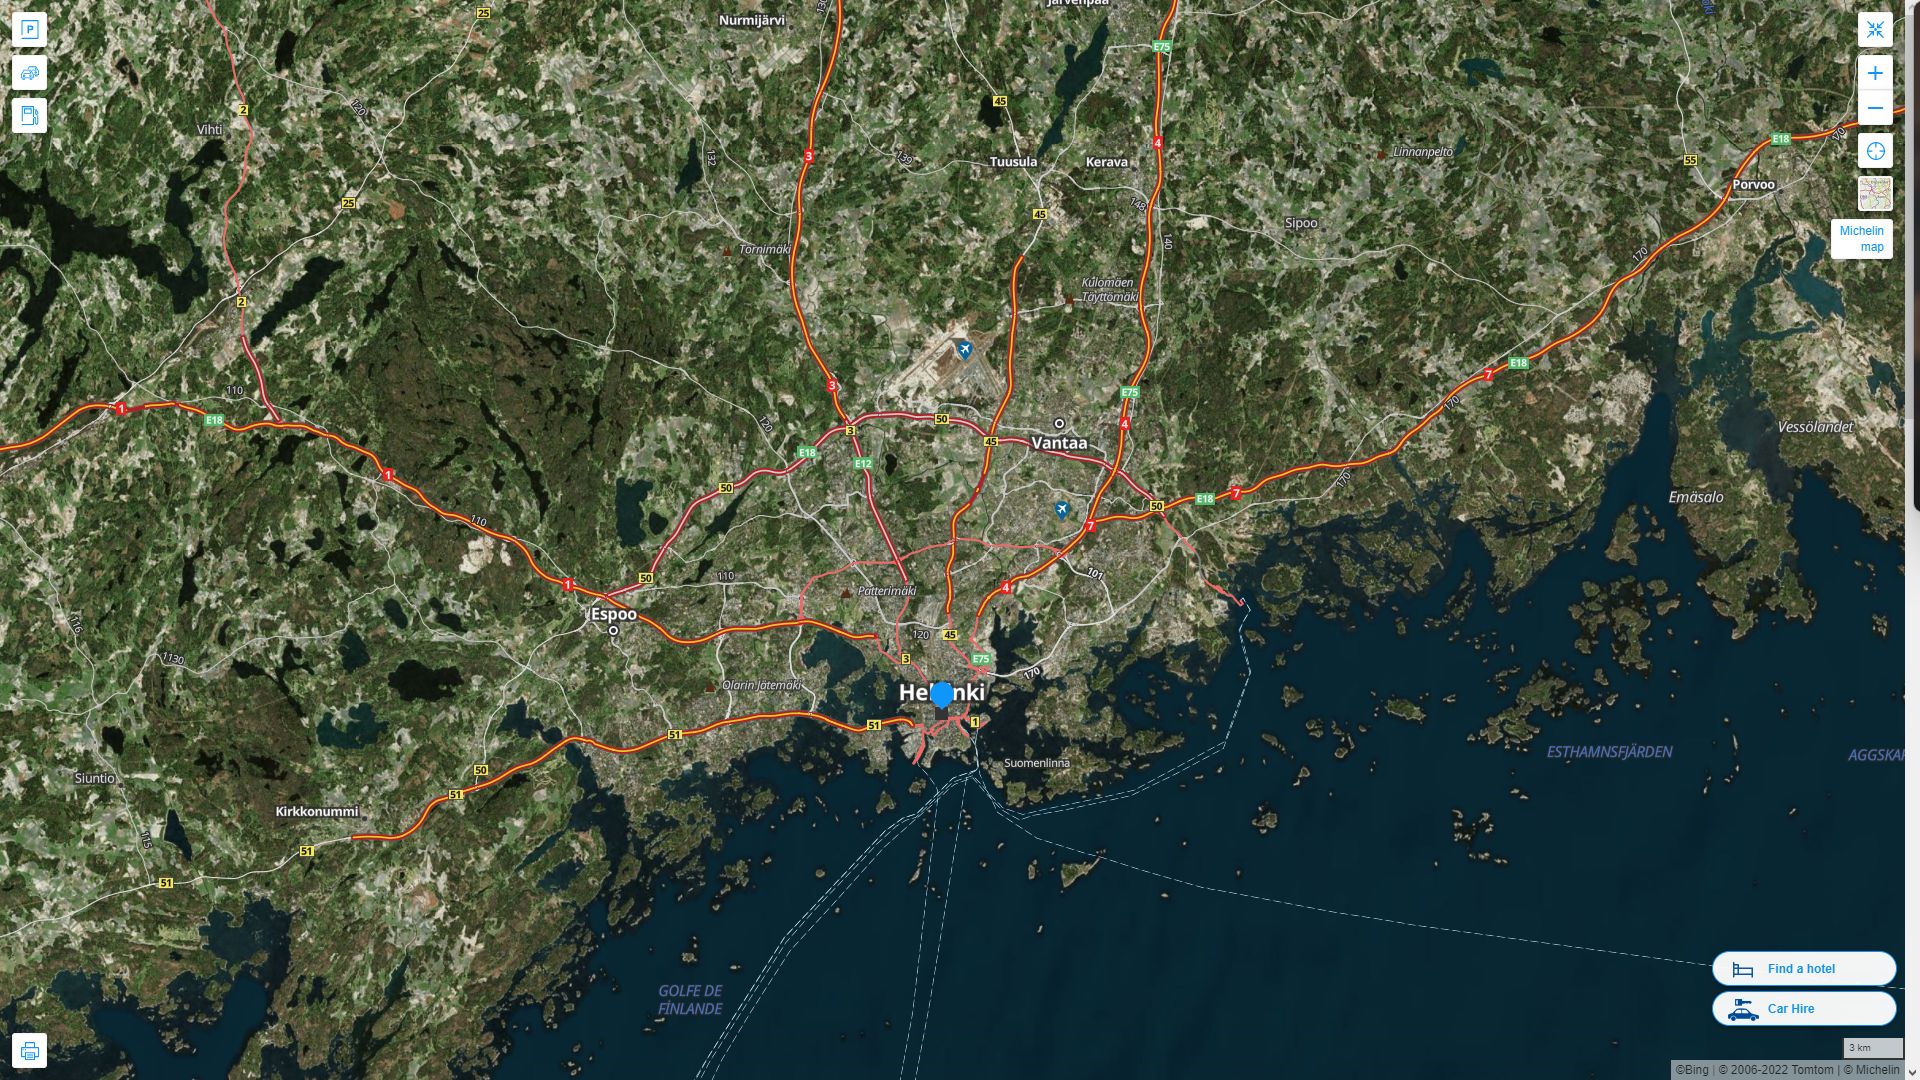 Helsinki Highway and Road Map with Satellite View